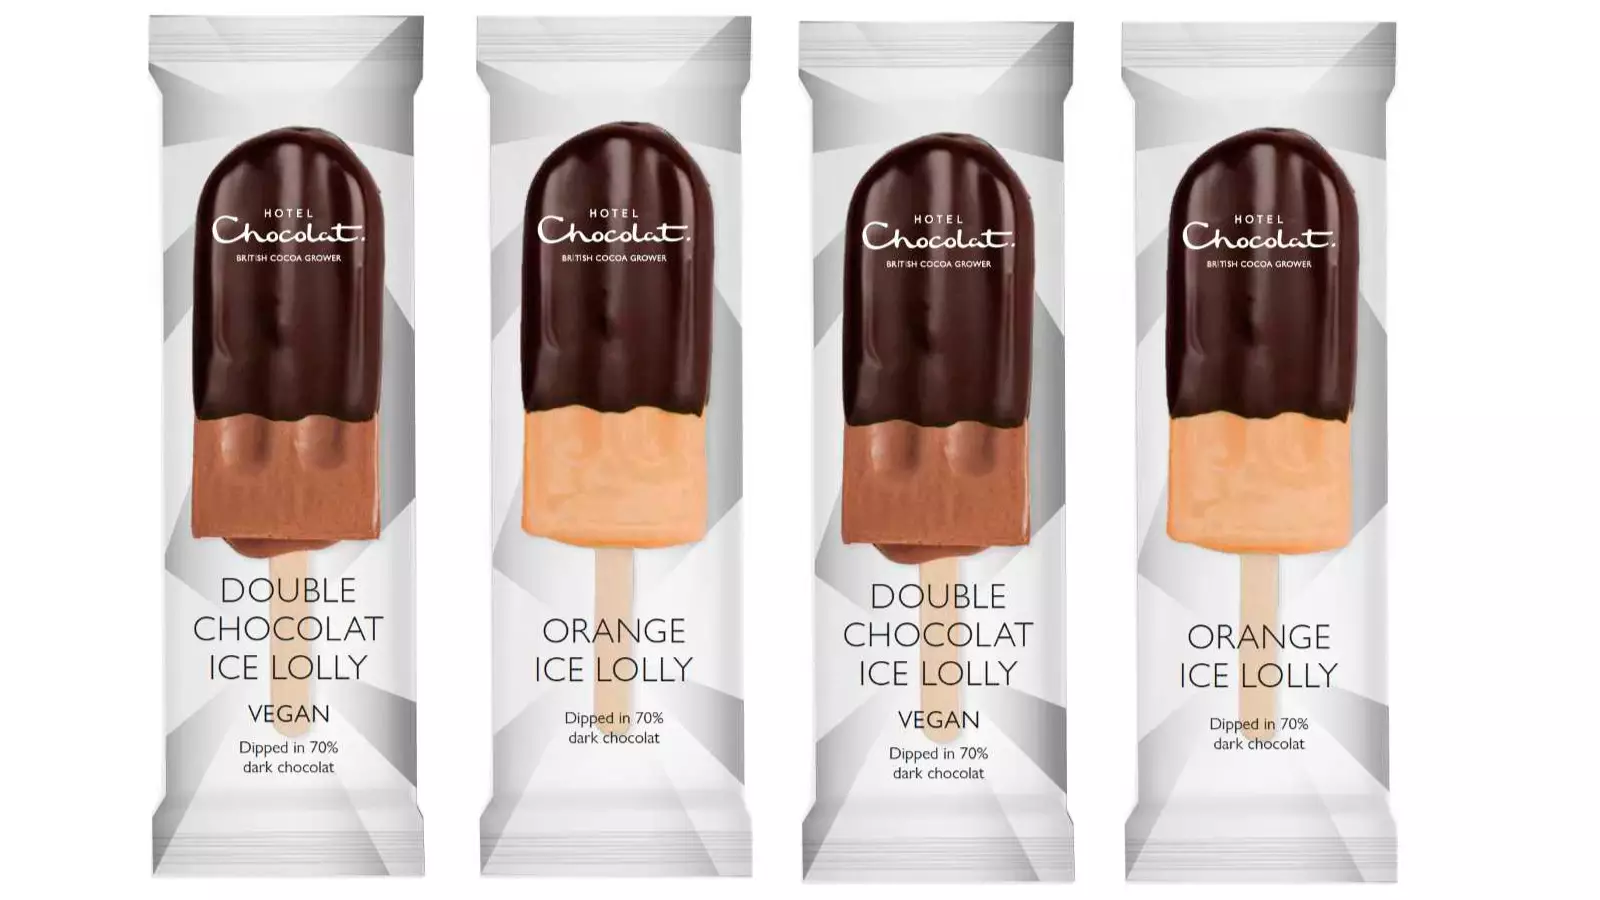 Hotel Chocolat Launches All-Natural, Vegan Ice Lollies 